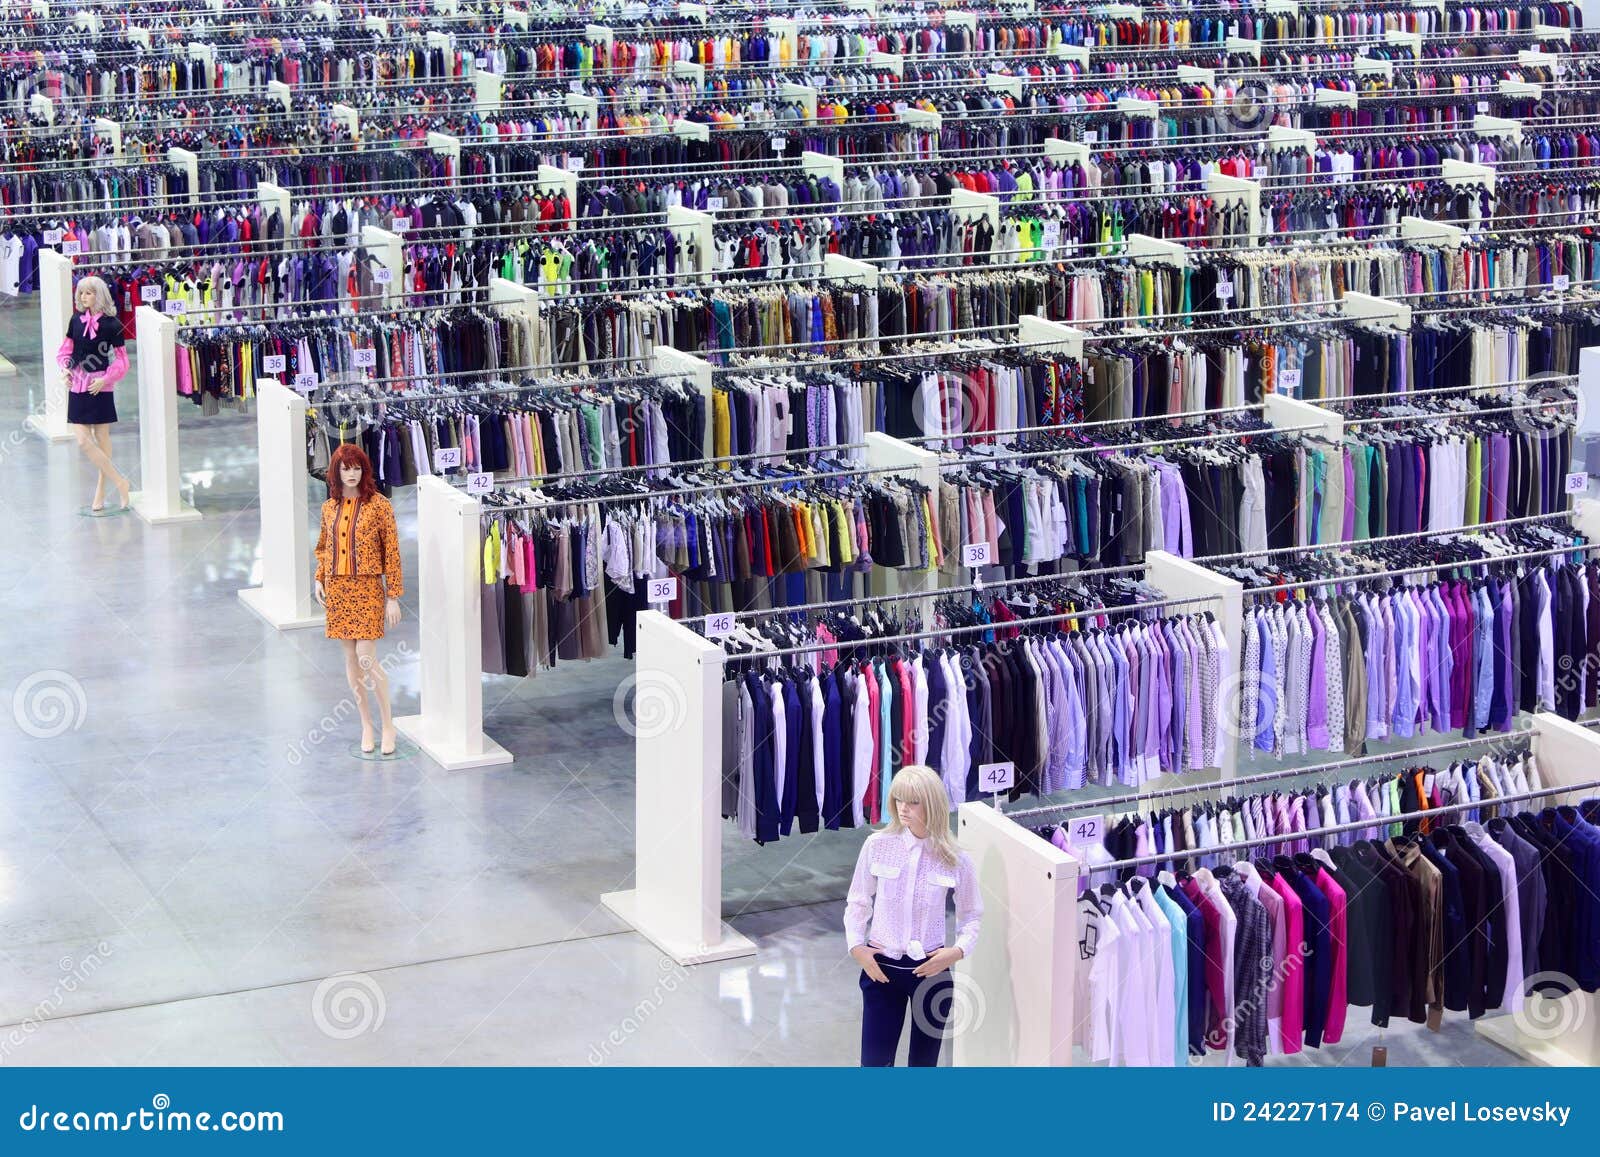 Clothing Store Dummies And Rows With Hangers Stock Photo 